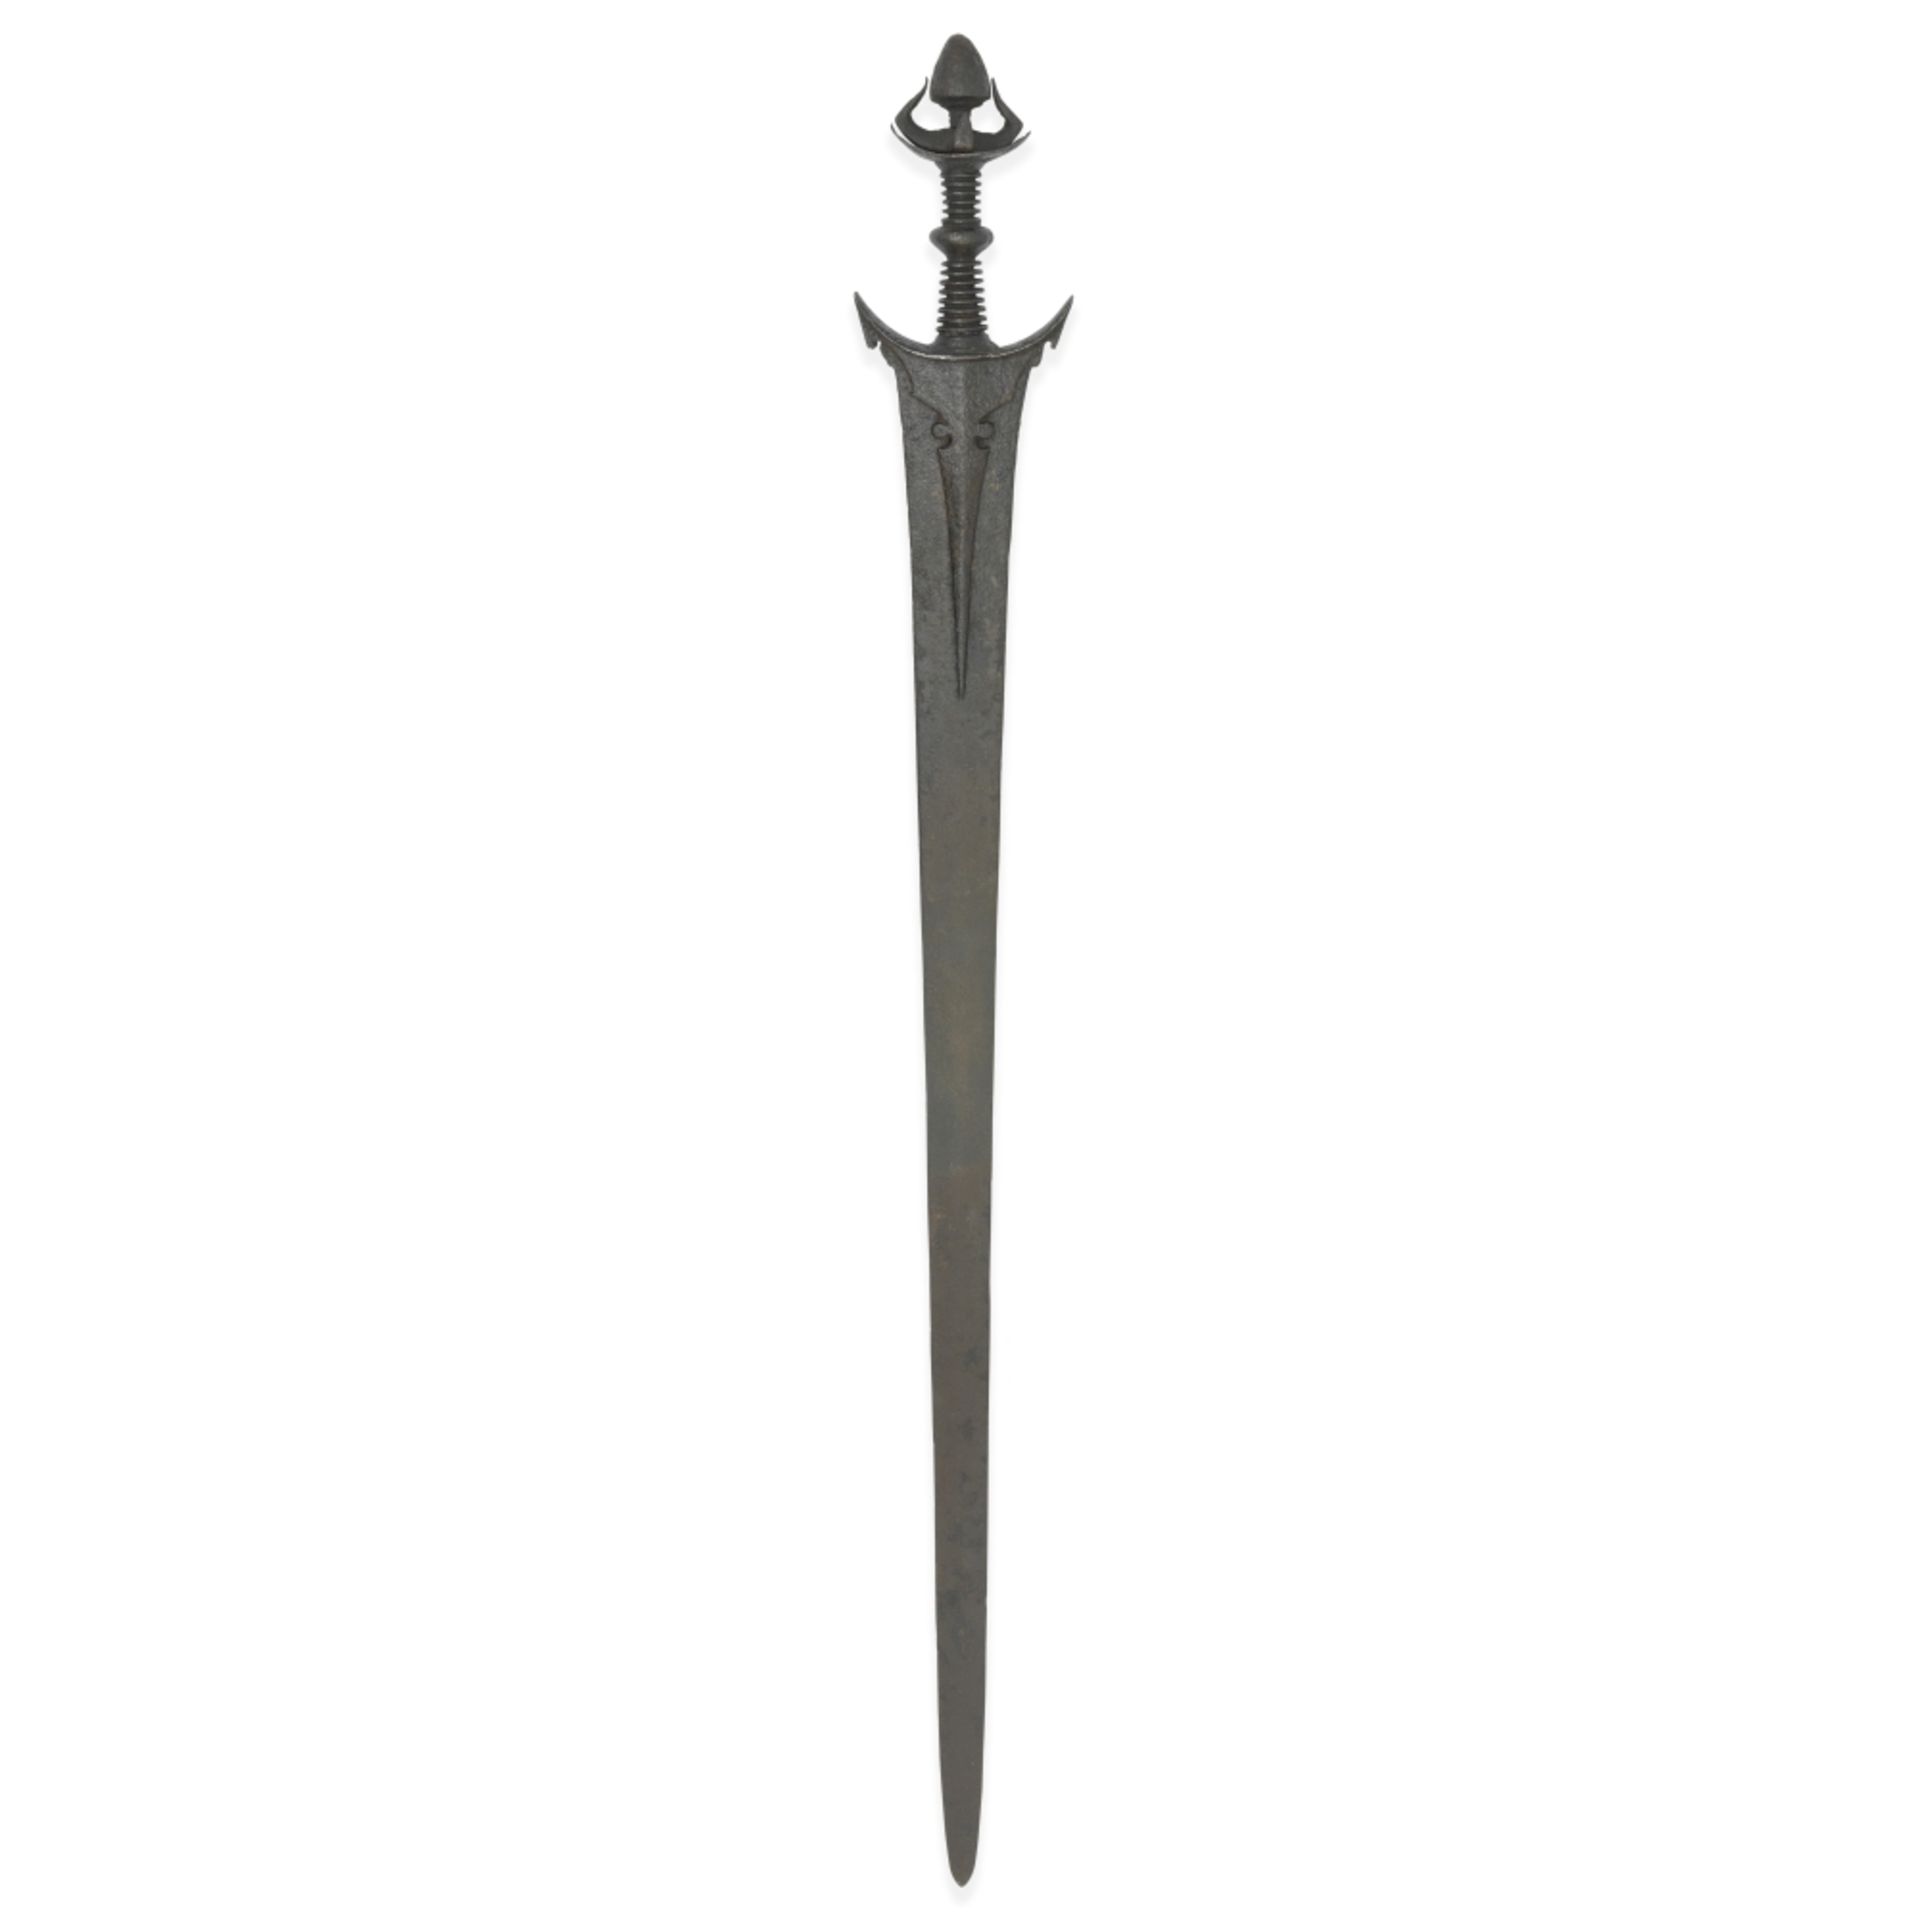 A rare South Indian steel sword probably Madras, mid-16th Century